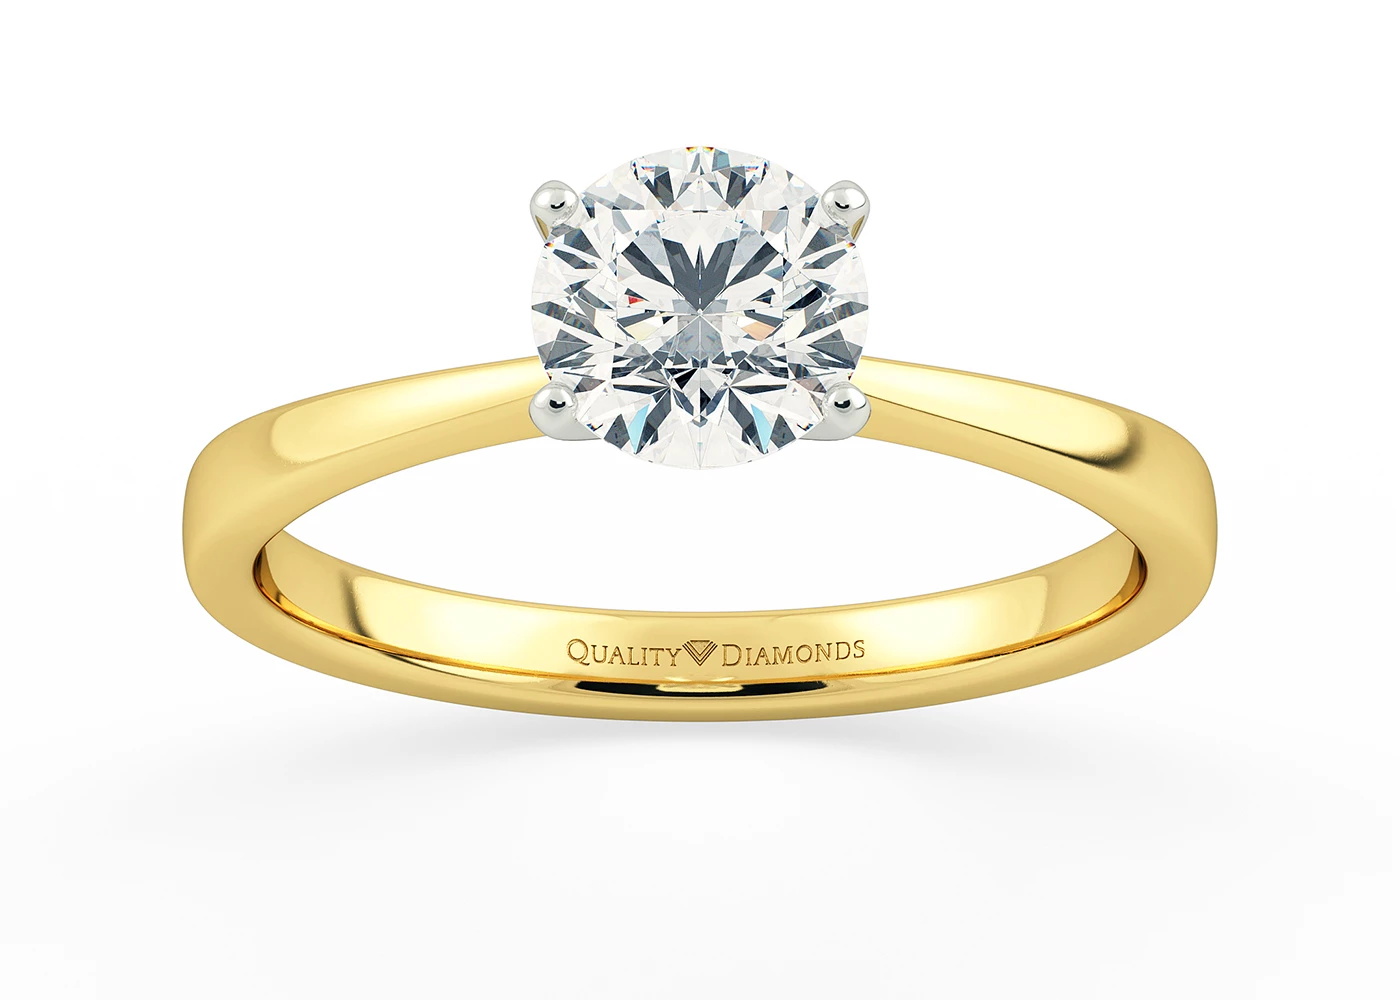 Round Brilliant Amabelle Diamond Ring in 9K Yellow Gold